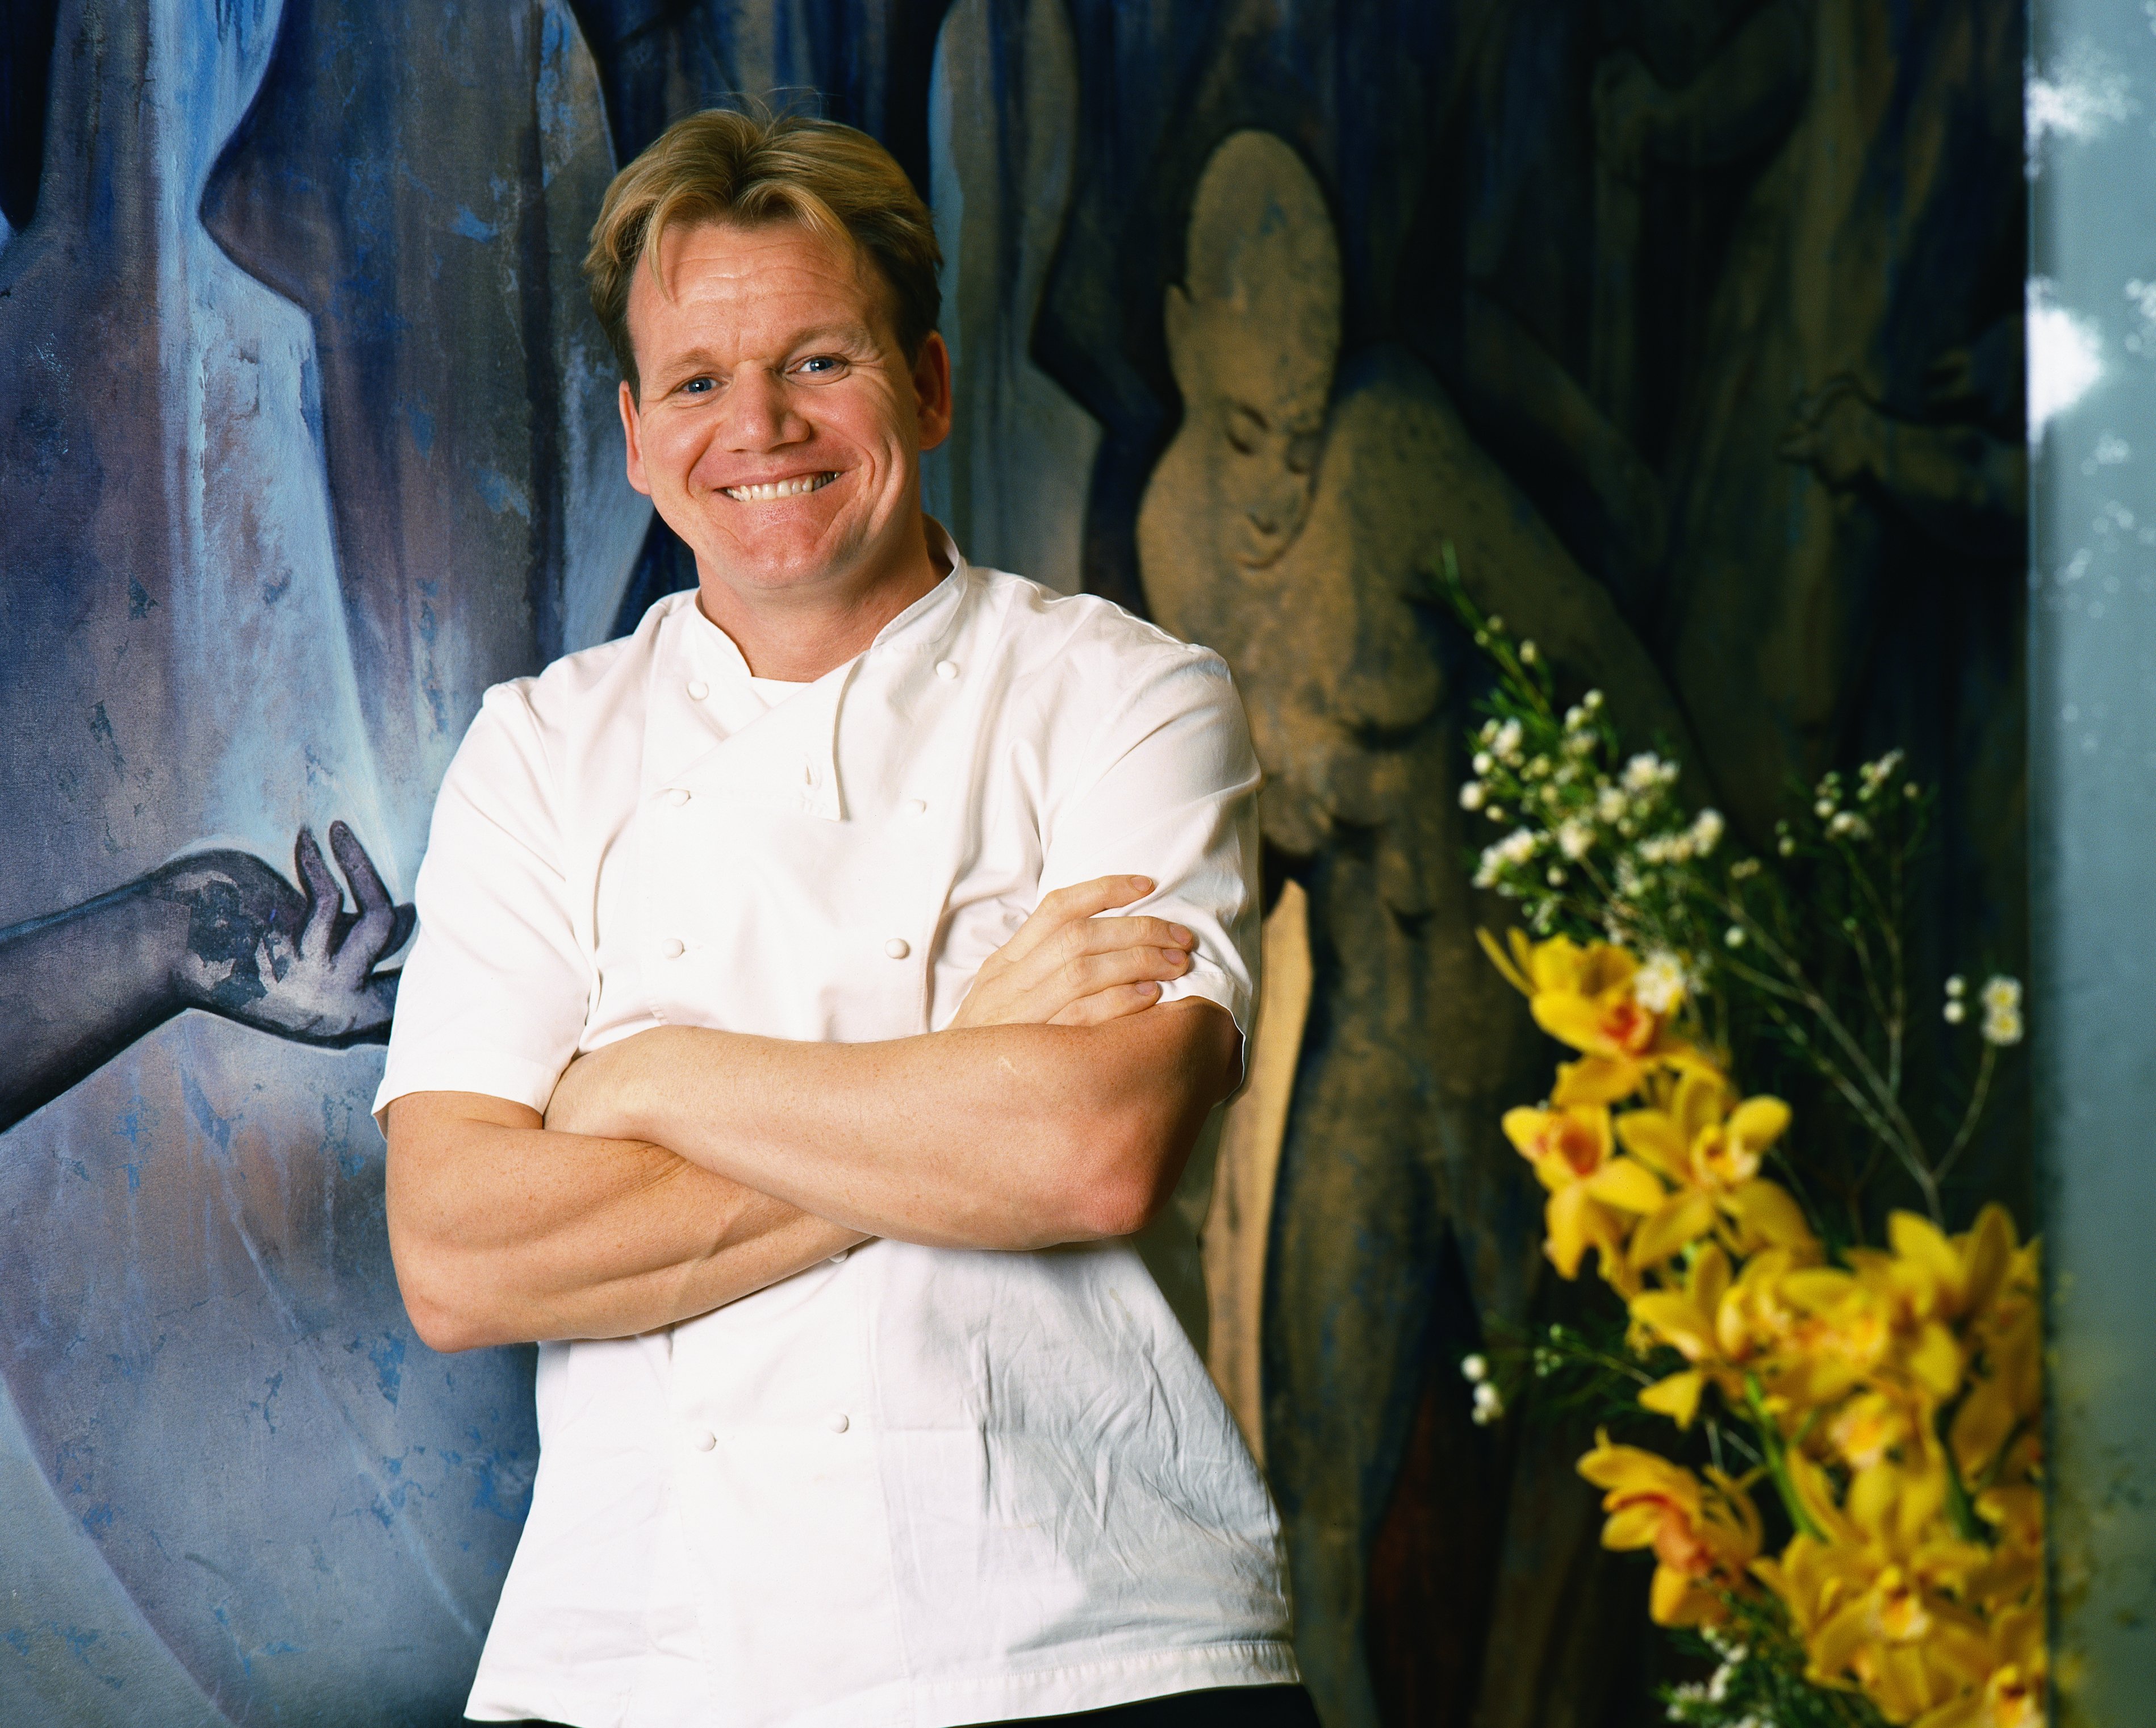 A 2001 photo of celebrity Chef Gordon Ramsay beside his restaurant in London. | Photo: Getty Images